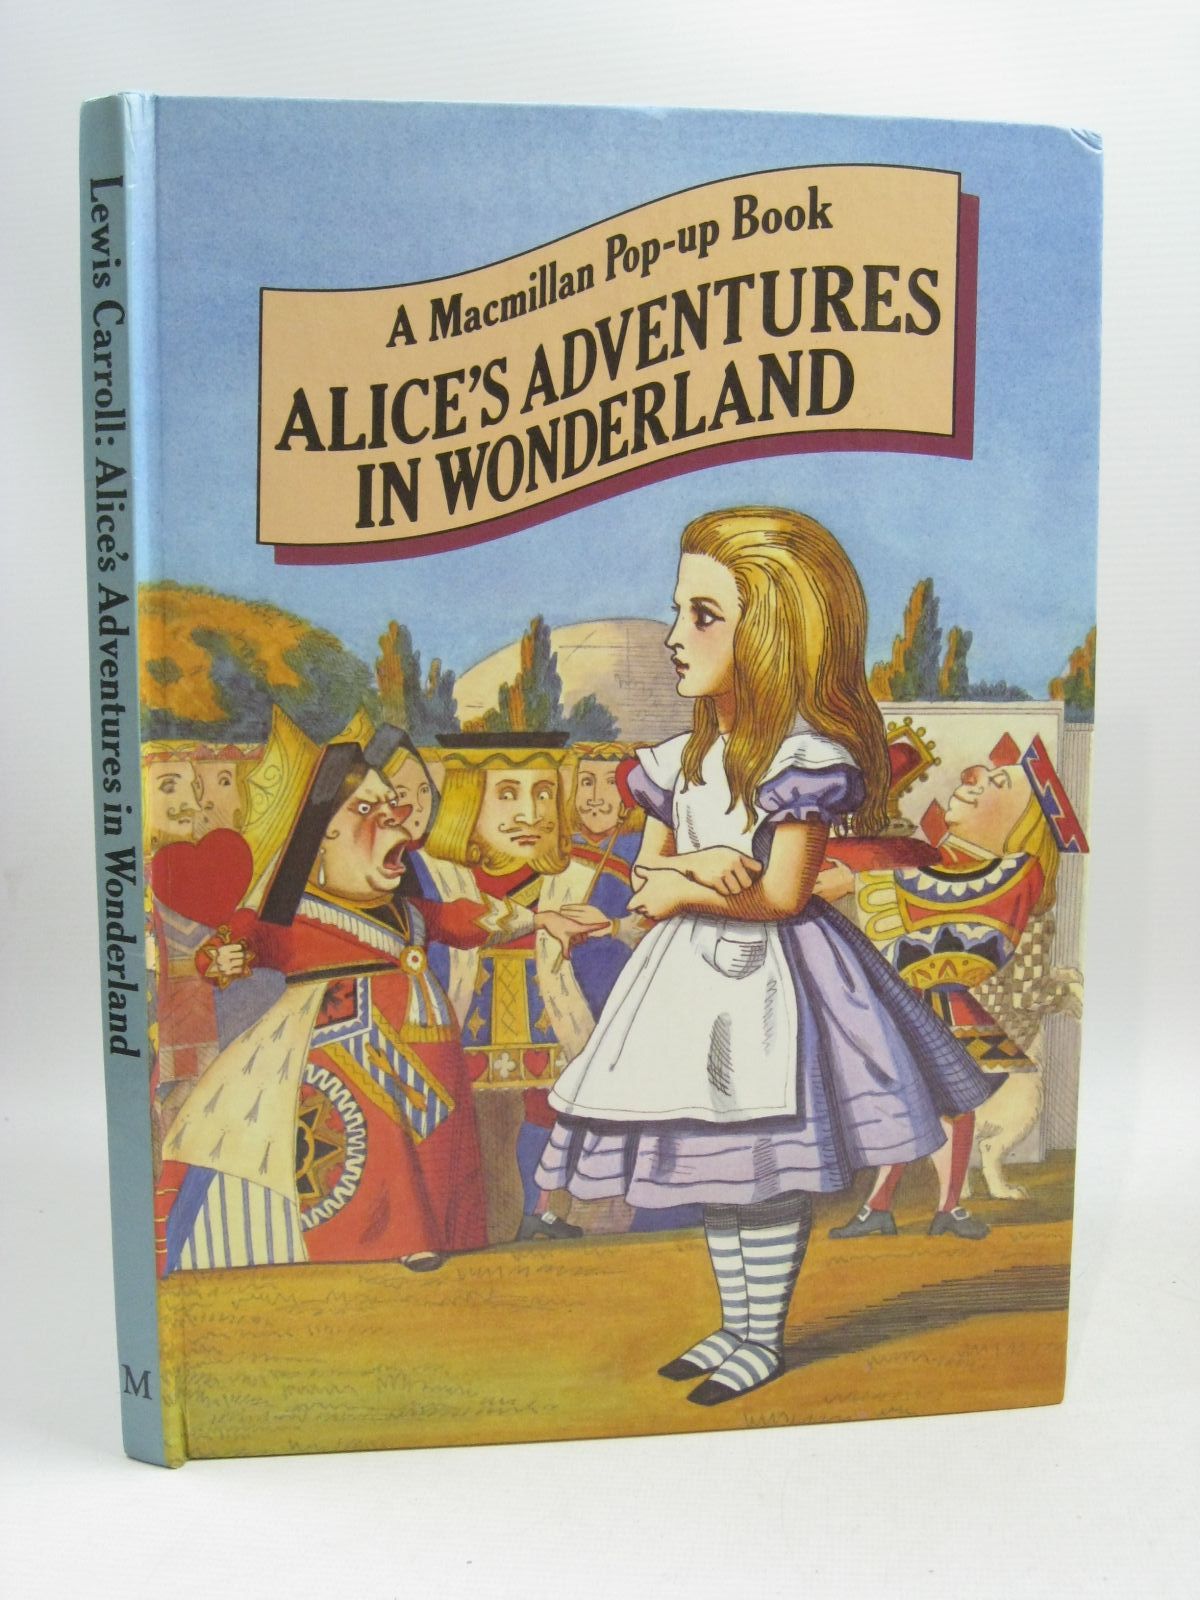 Stella And Roses Books Alices Adventures In Wonderland Written By Lewis Carroll Stock Code 6906